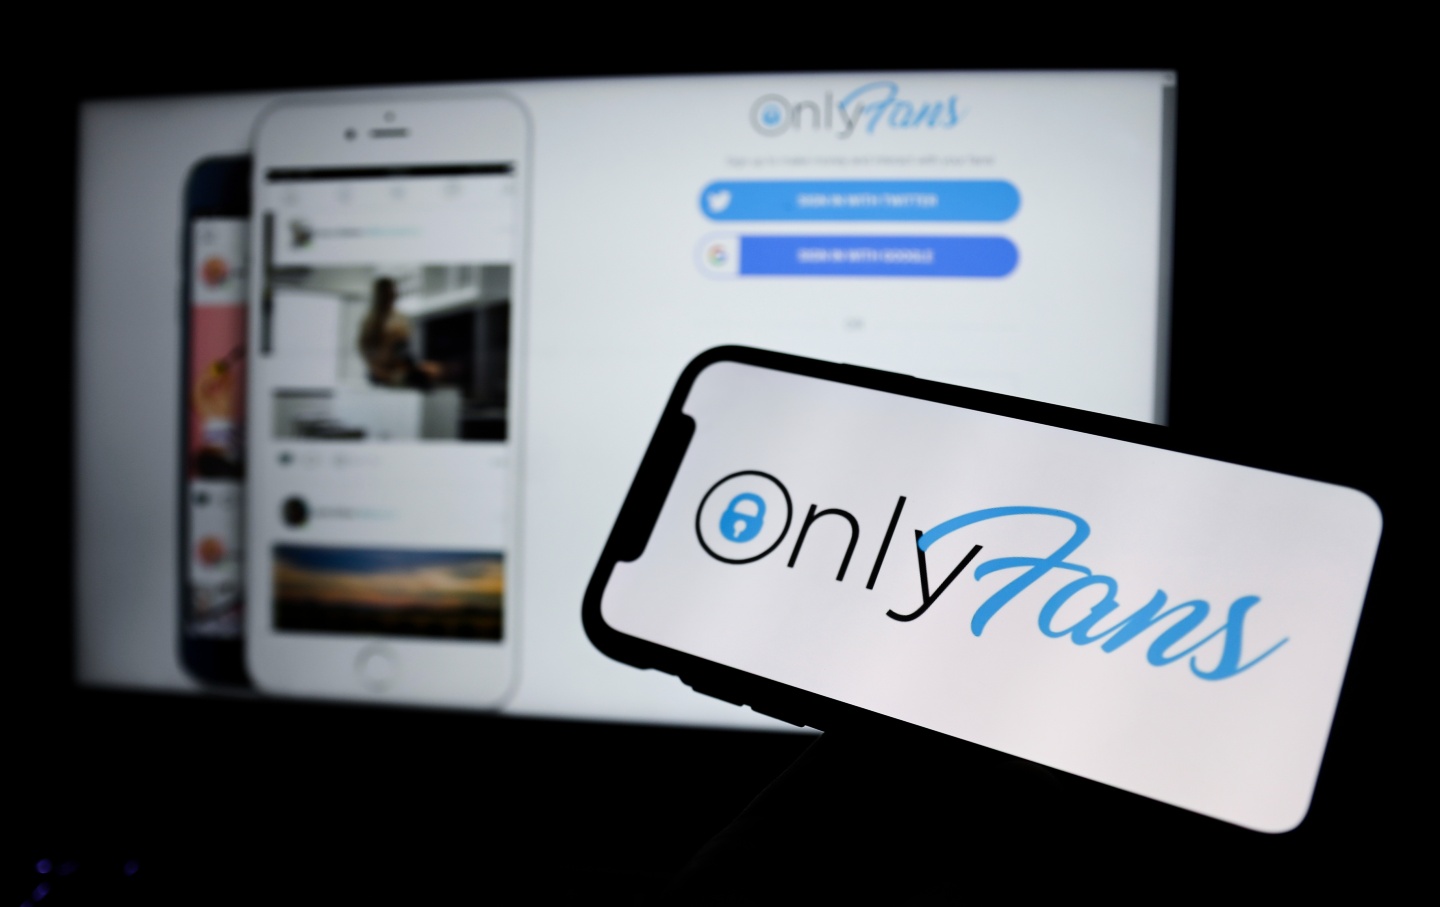 How to enable sms verification on onlyfans